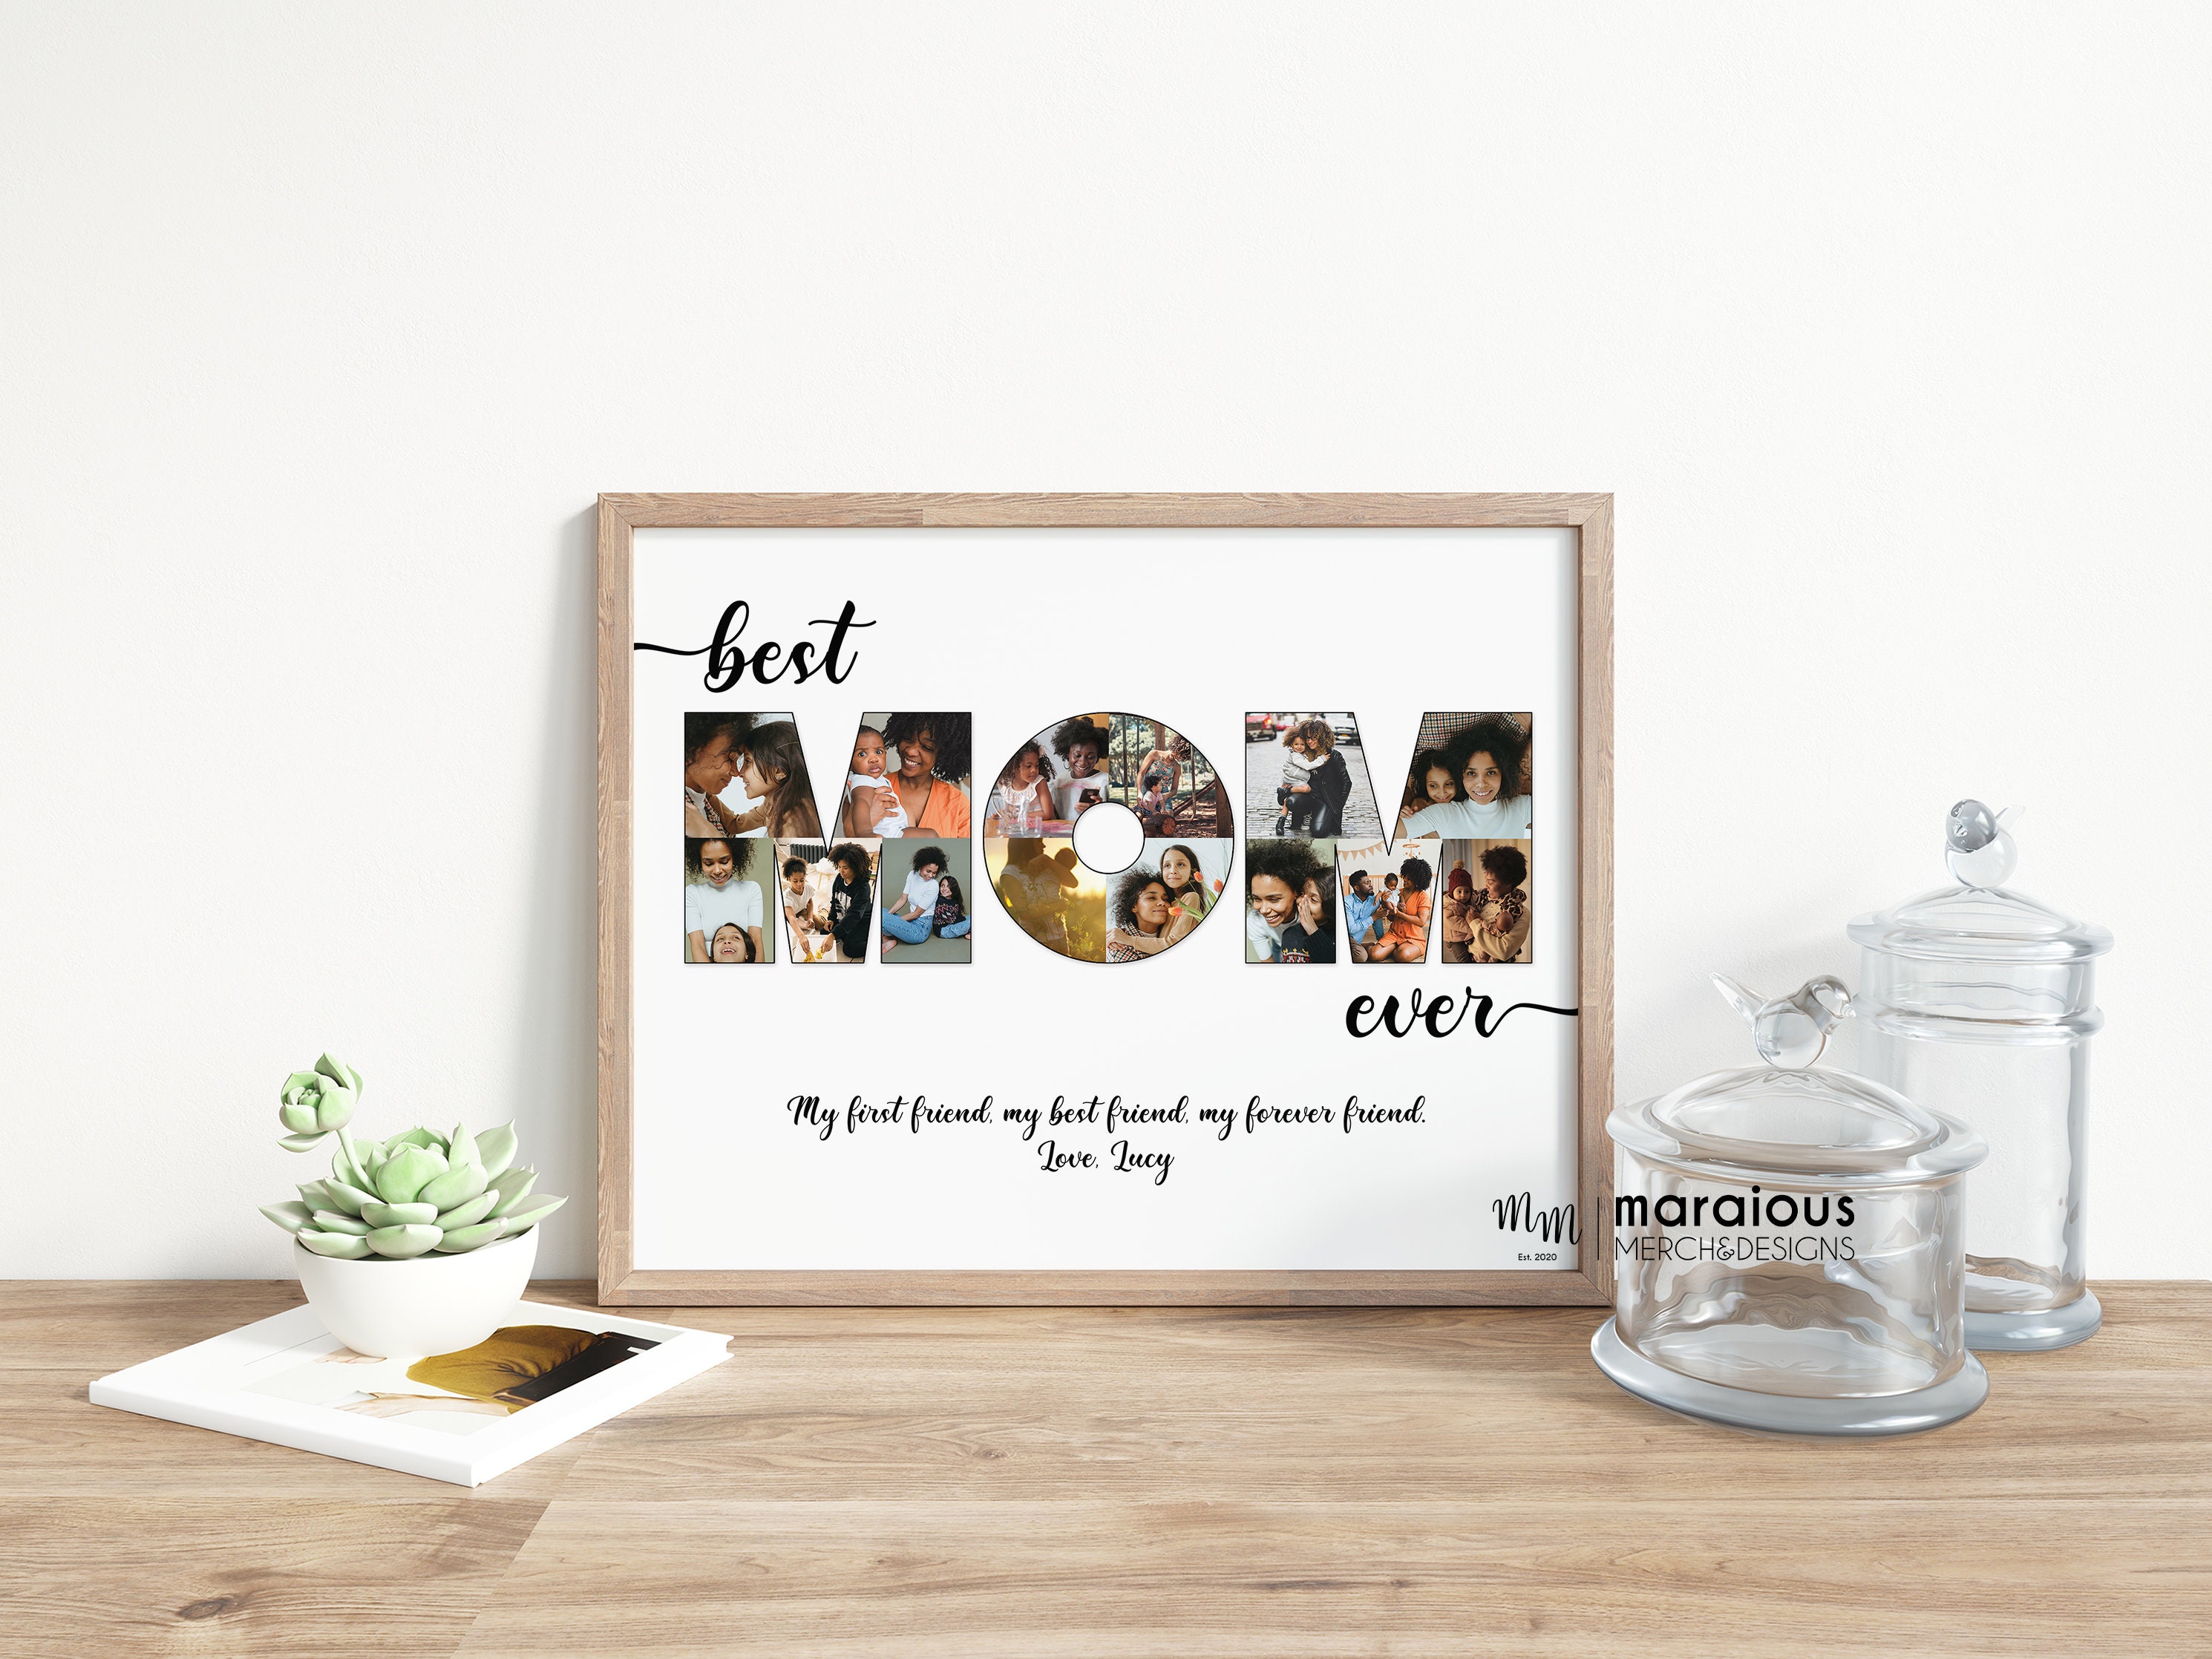 Best Mom Ever Photo Gifts, Custom Mom Gift Ideas, Personalized Photo Mother  Gift From Daughter, Photo Collage Personalized Gifts for Mom 